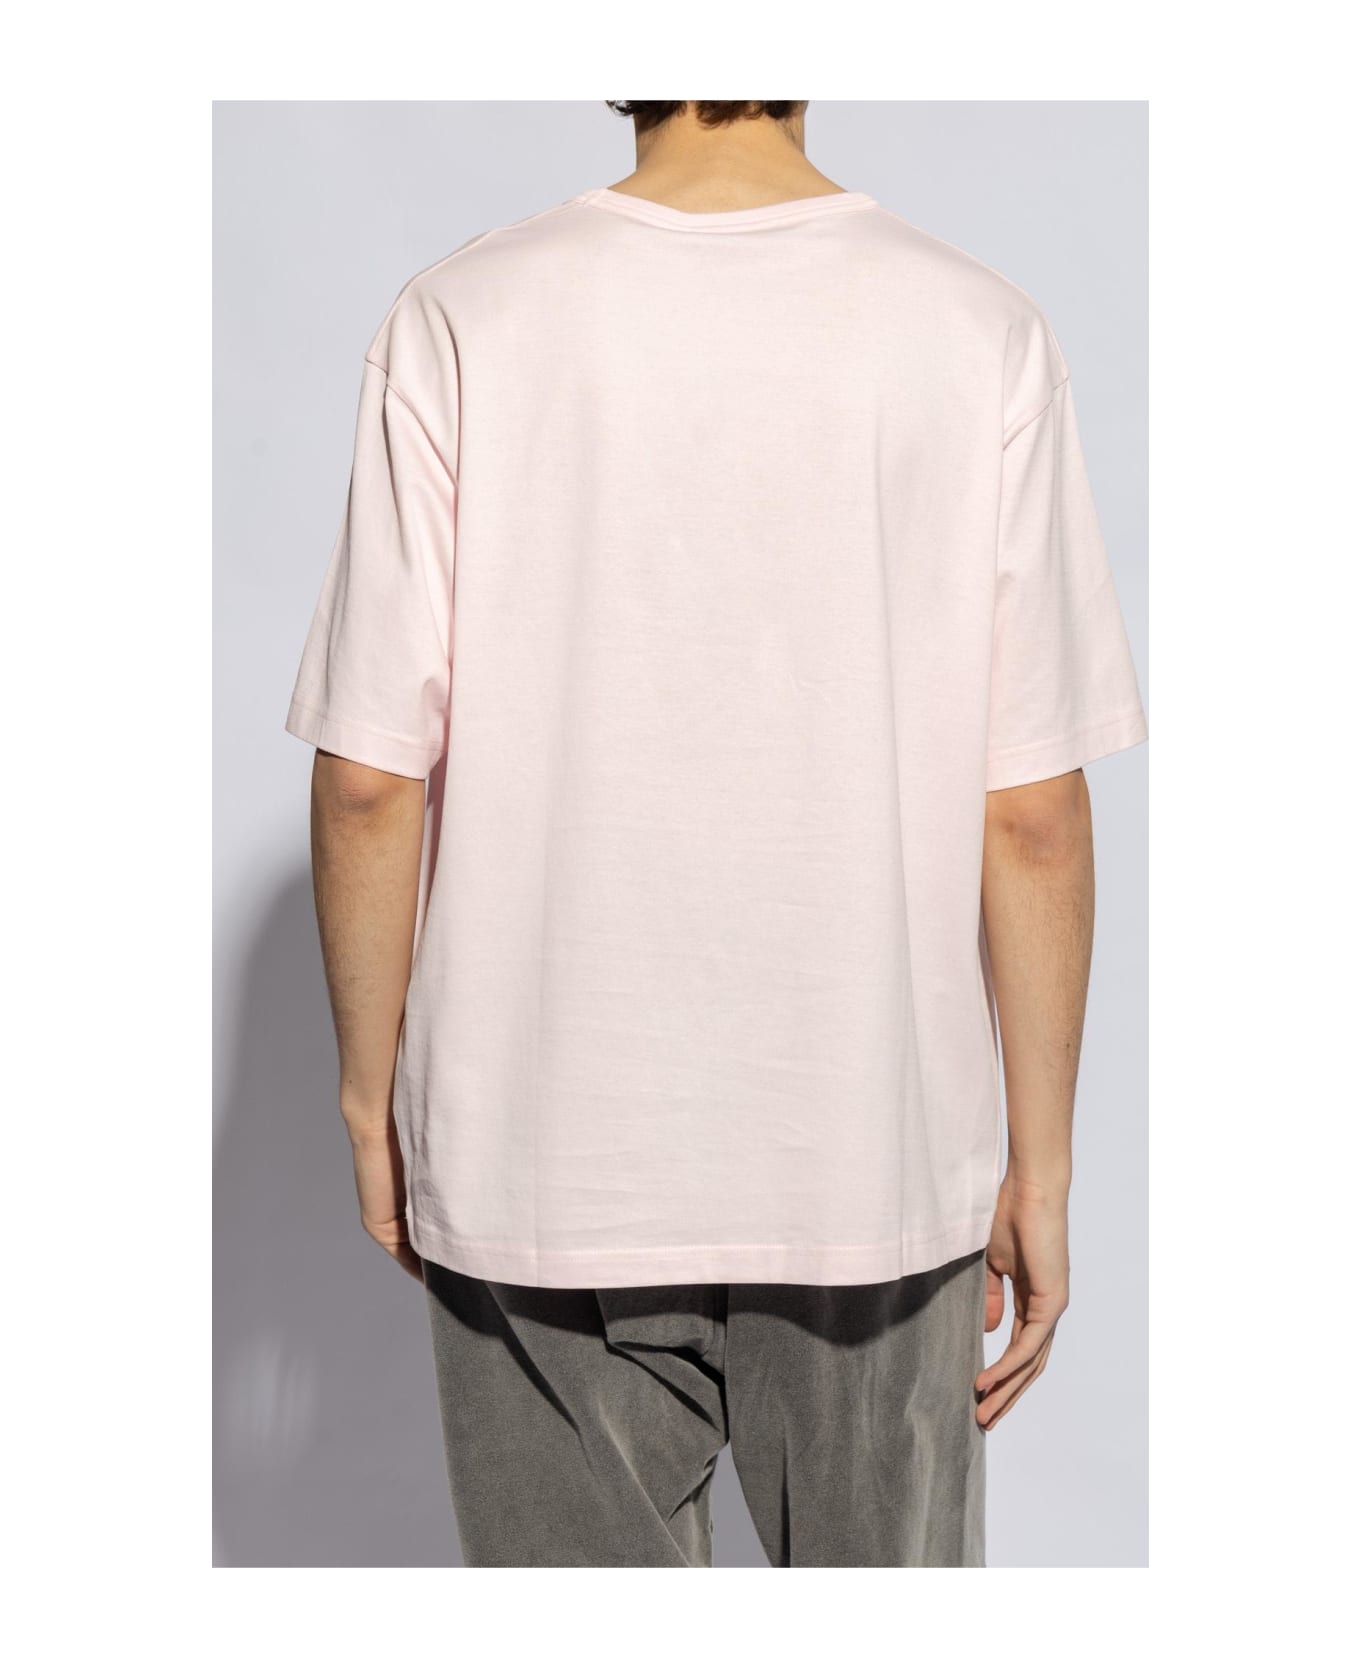 Acne Studios Patched T-shirt - Light Pink